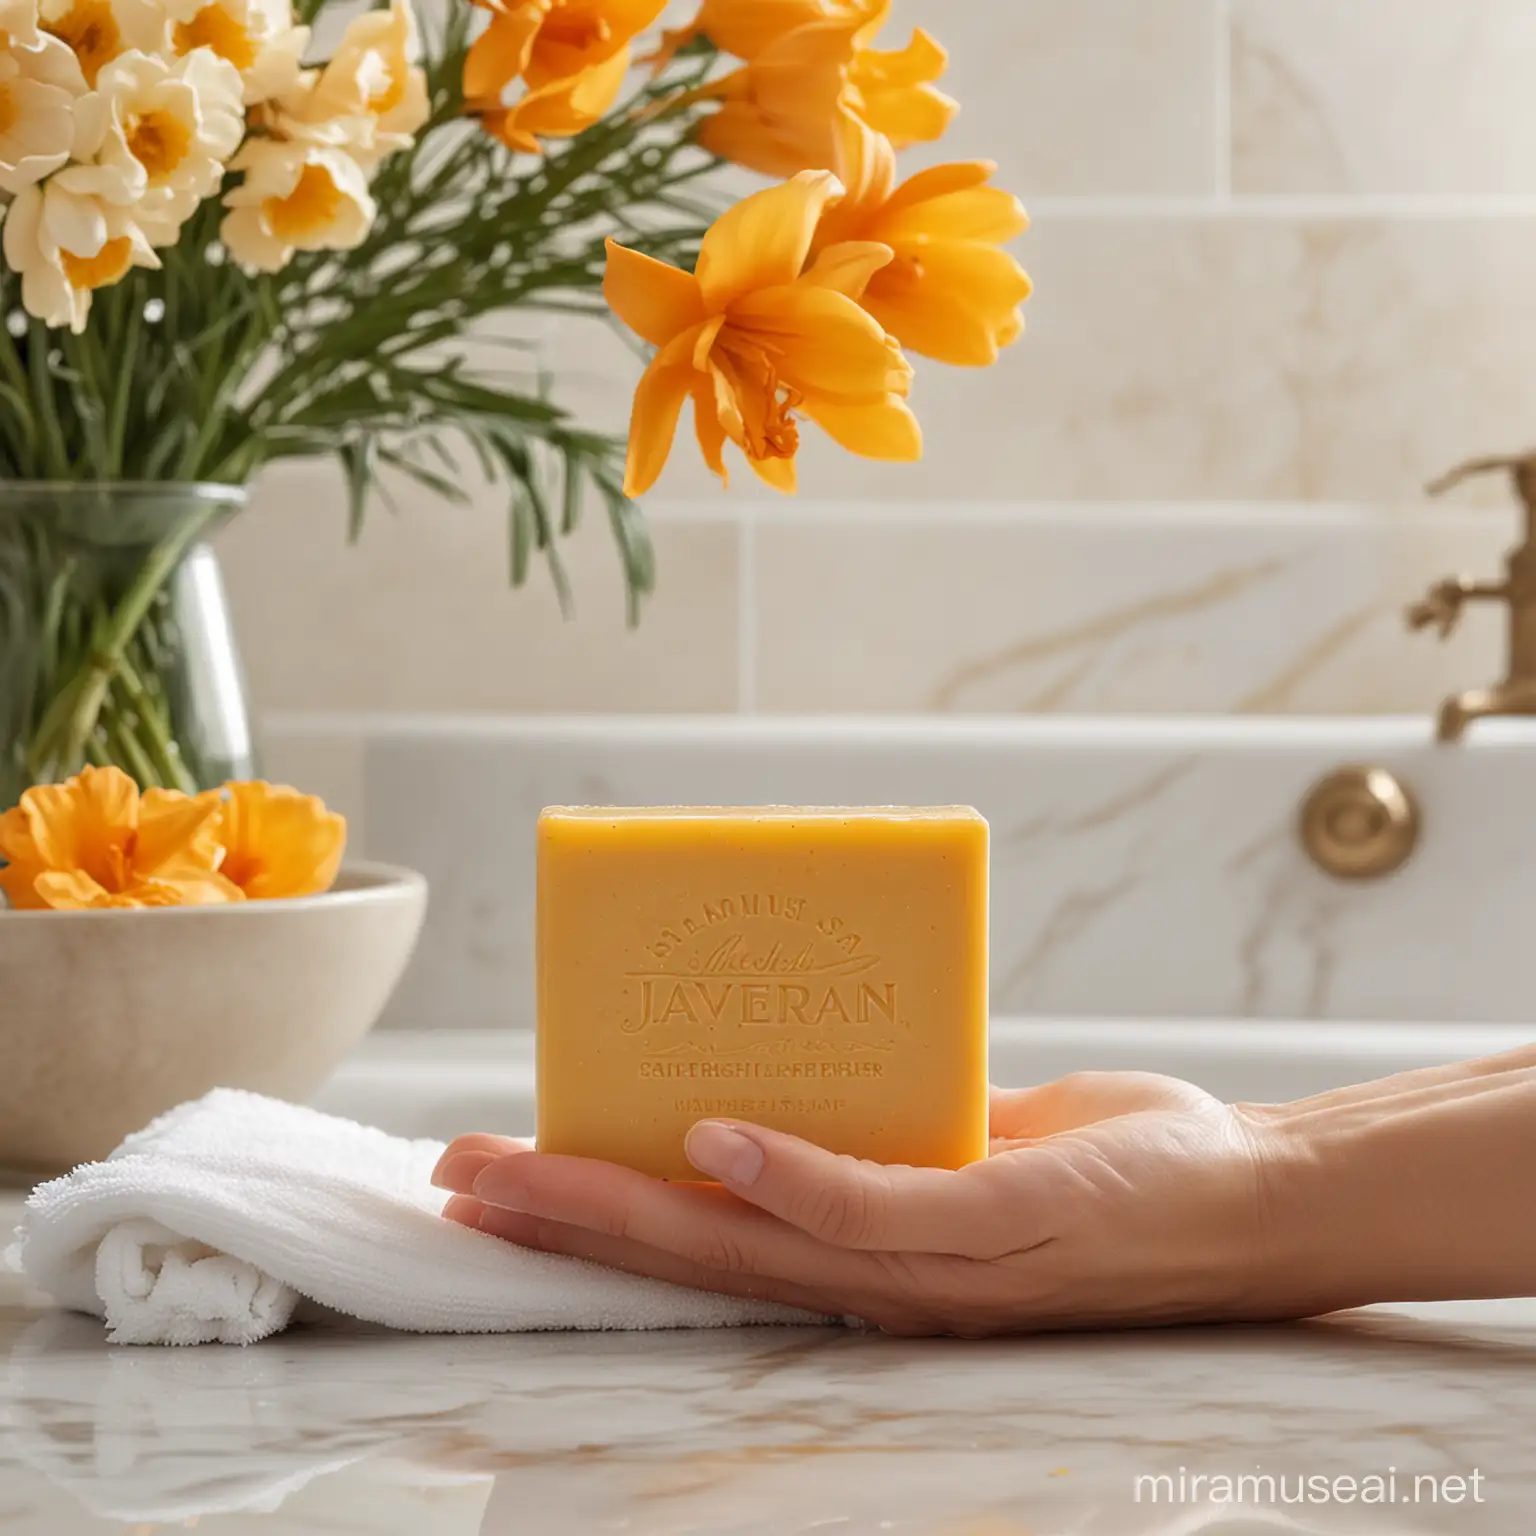 A photorealistic image of a hand holding a bar of JAVERIAN Saffron Soap in a luxurious bathroom setting. The soap is a soft, creamy yellow color with visible saffron threads embedded throughout. Gentle steam rises from the soap, hinting at its luxurious lather. Water droplets cling to the soap and the hand, showcasing its hydrating properties. In the background, a bouquet of fresh saffron flowers sits on a marble counter, next to a fluffy white towel.